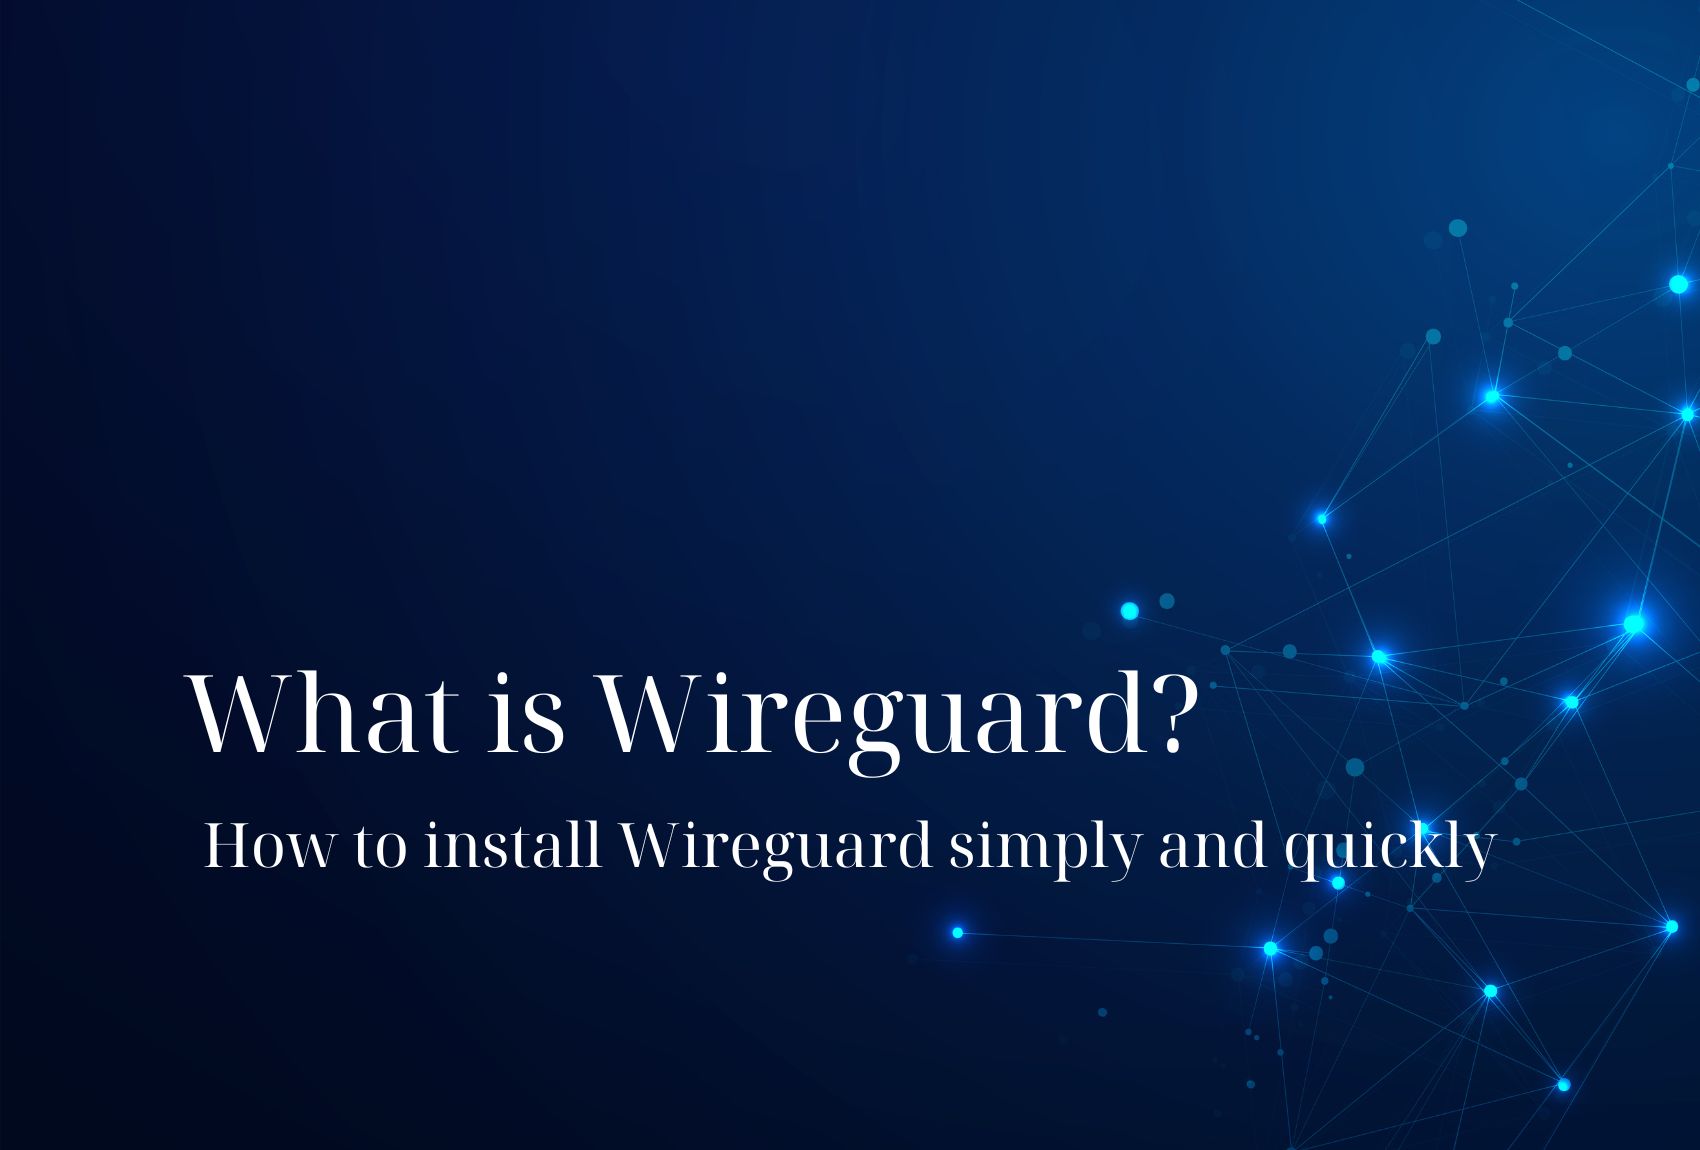 What is Wireguard? How to install Wireguard simply and quickly